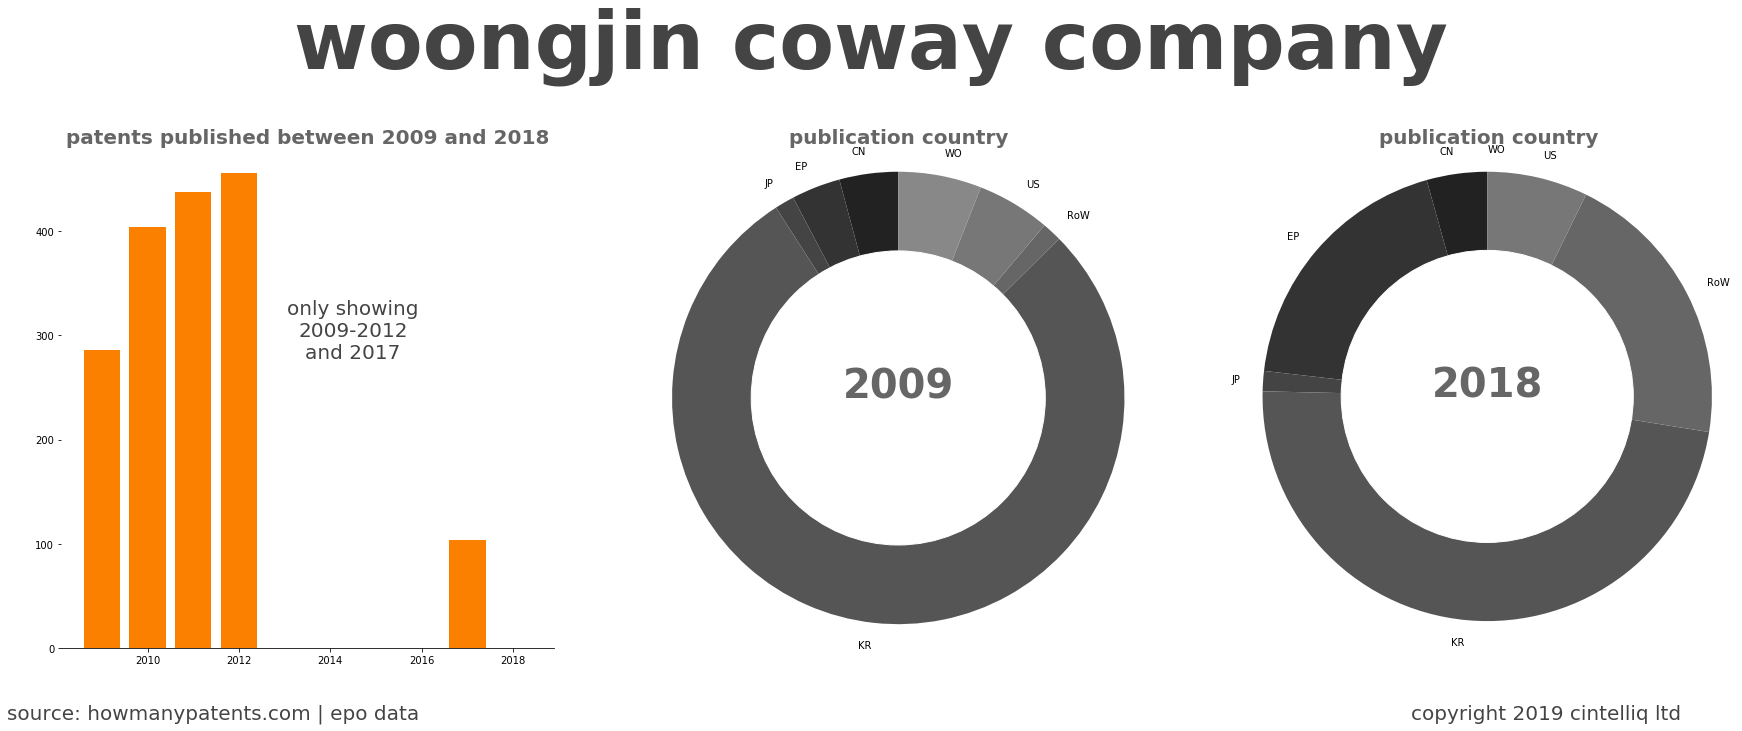 summary of patents for Woongjin Coway Company